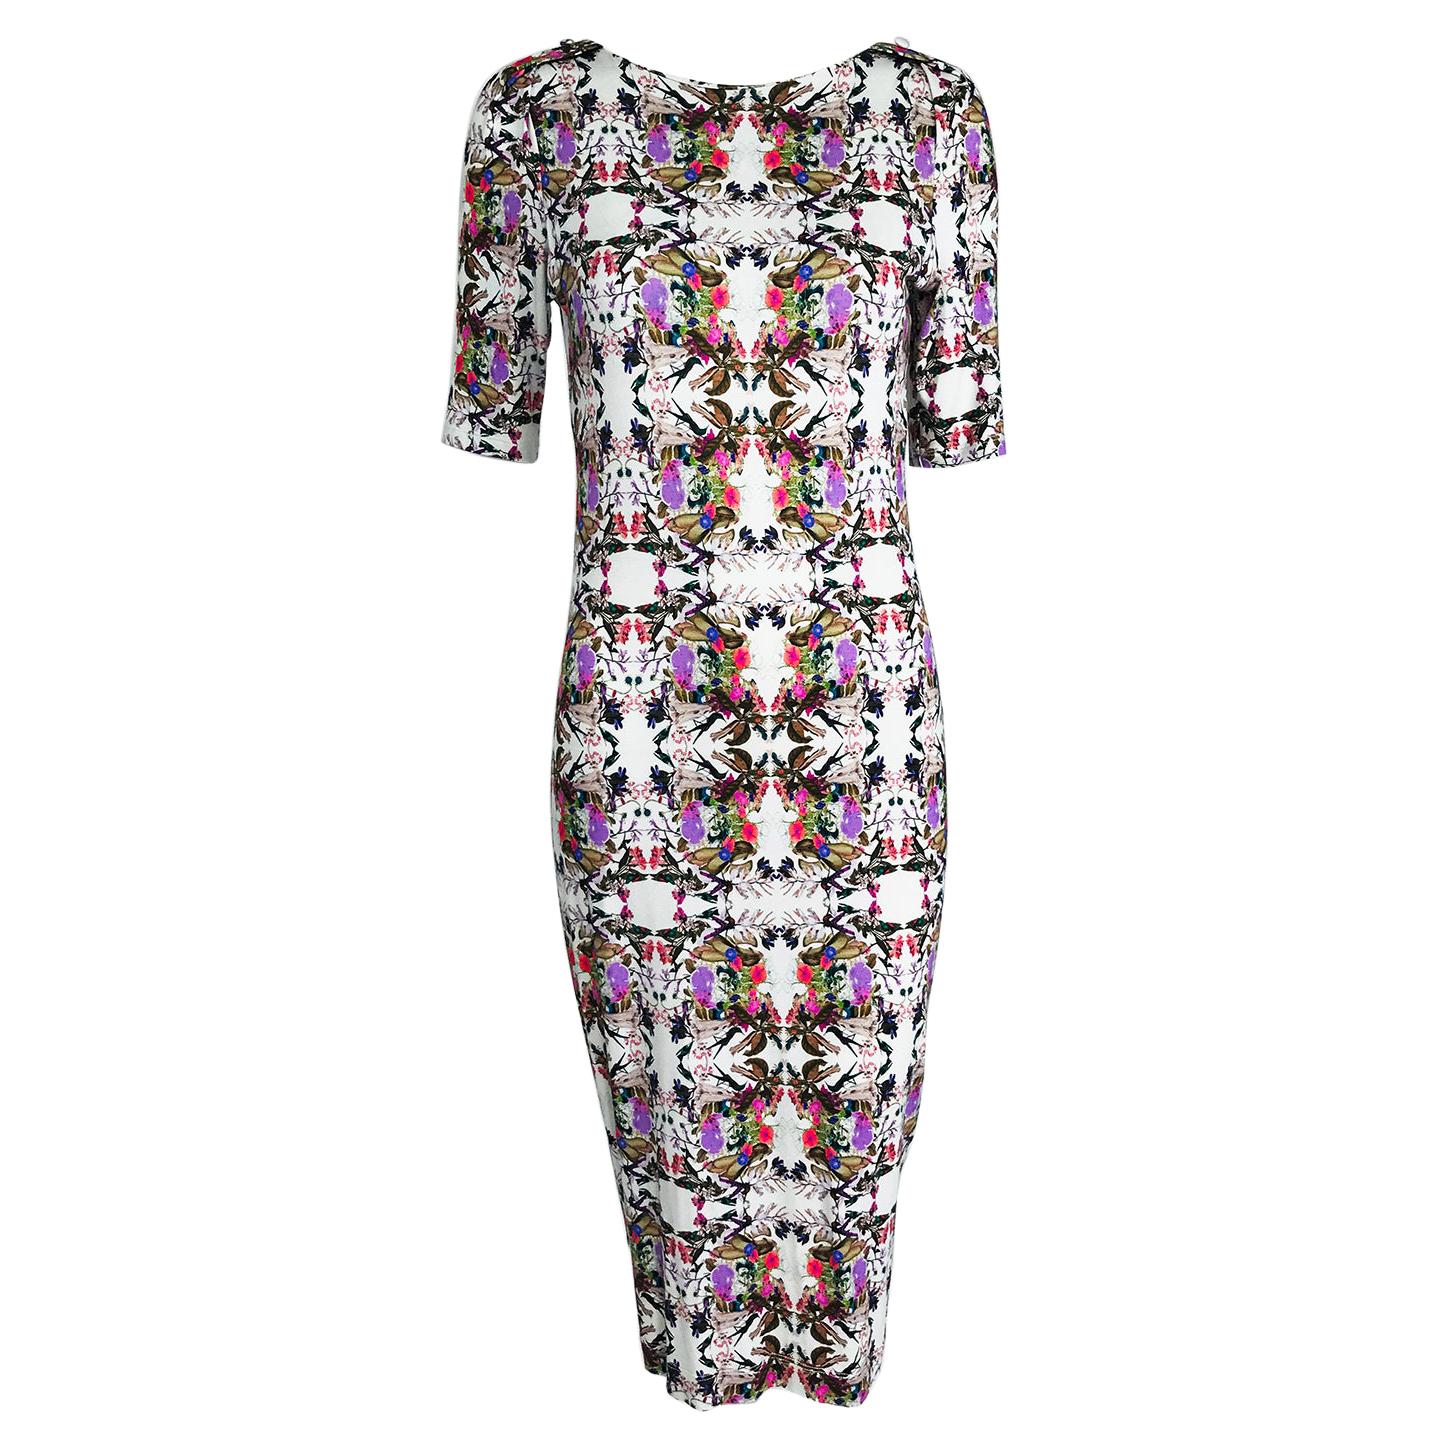 Erdem Floral Mirror Image Print Silky Jersey Dress For Sale at